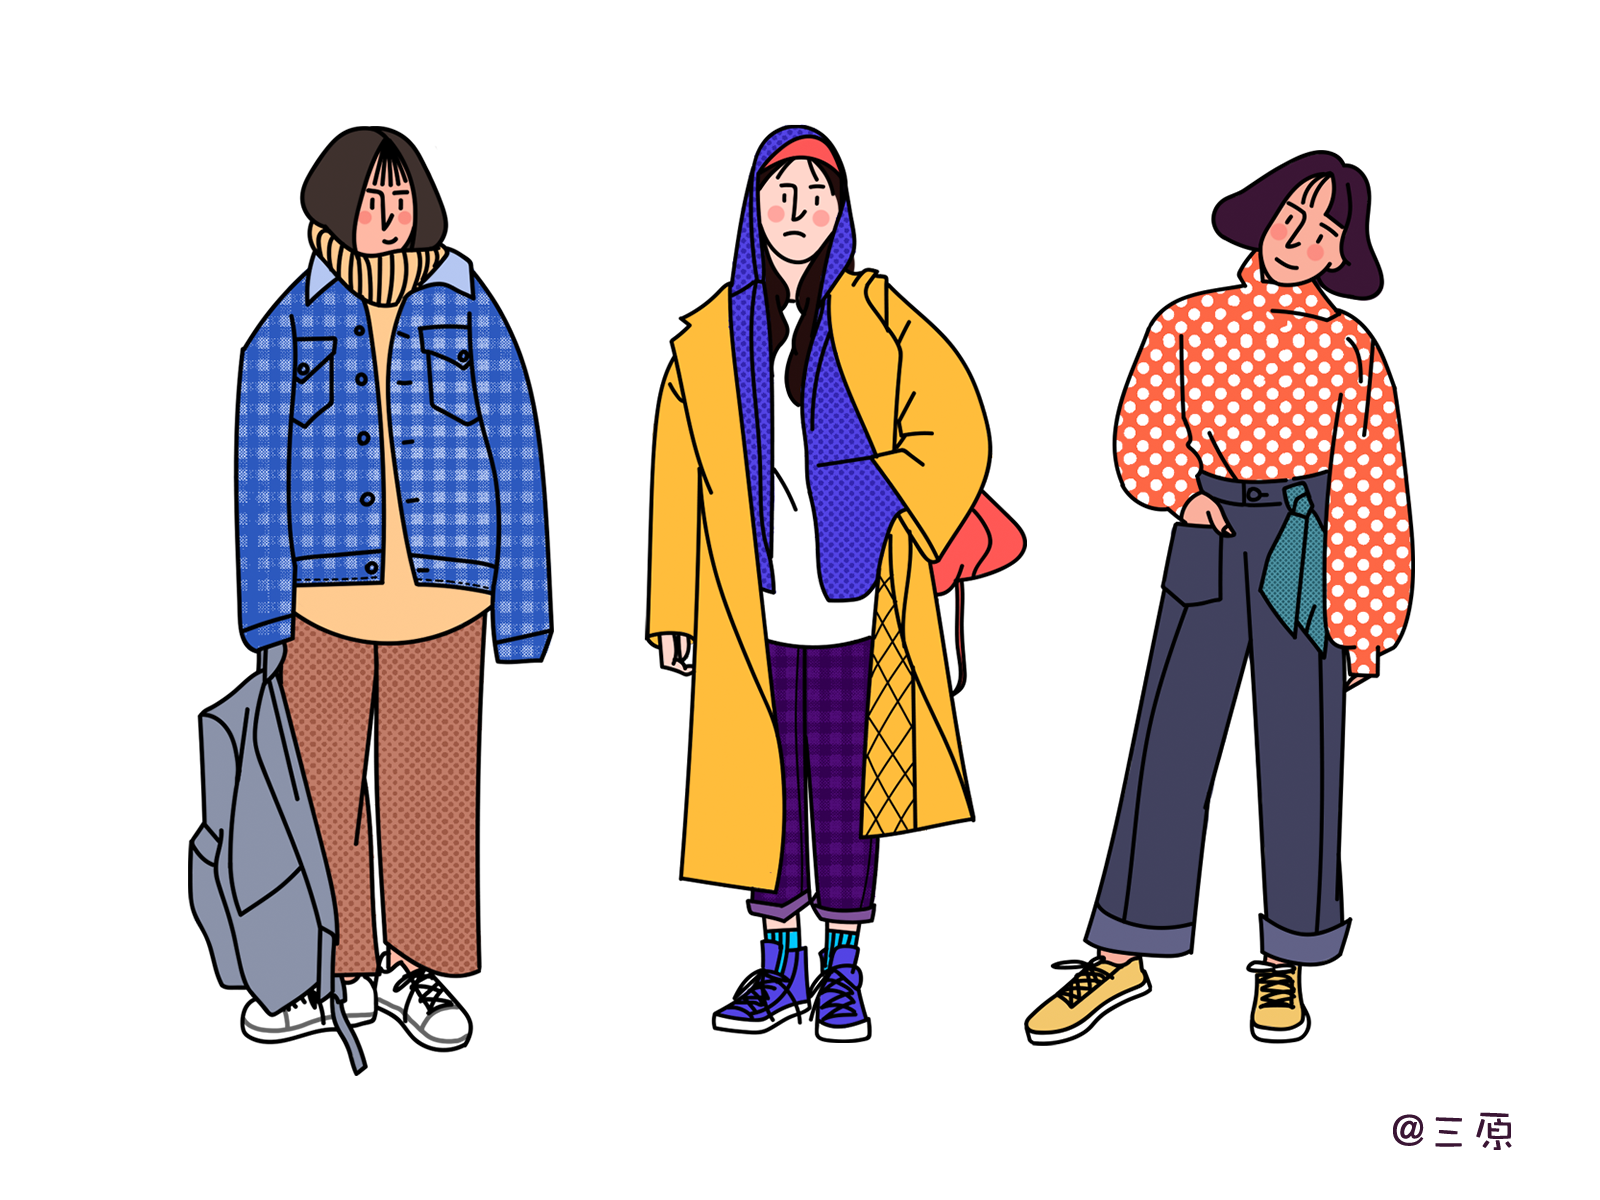 Cool girl by 三原 on Dribbble